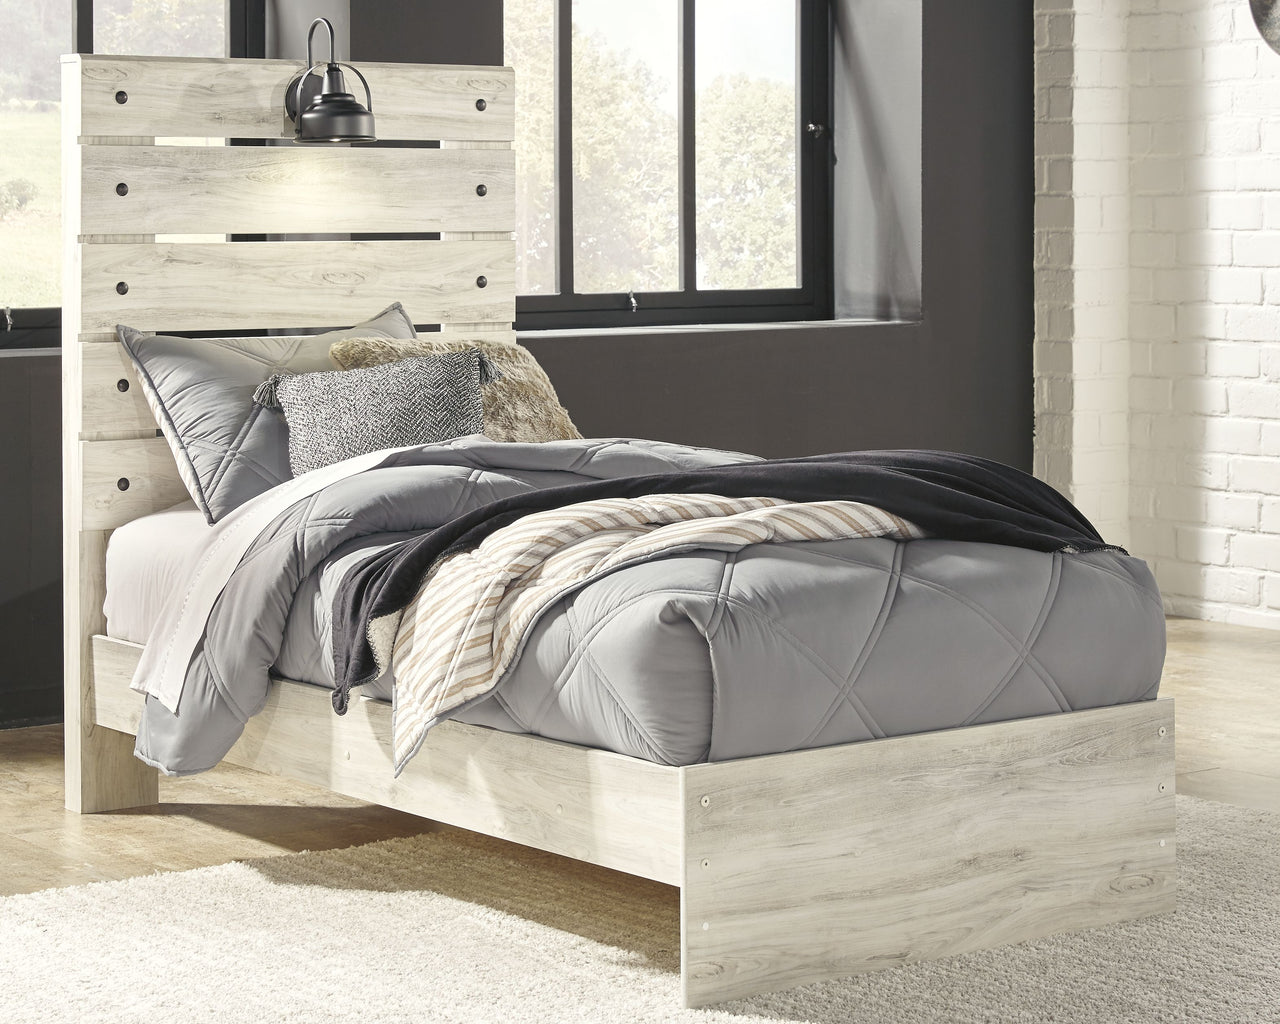 Cambeck - Youth Bedroom Set